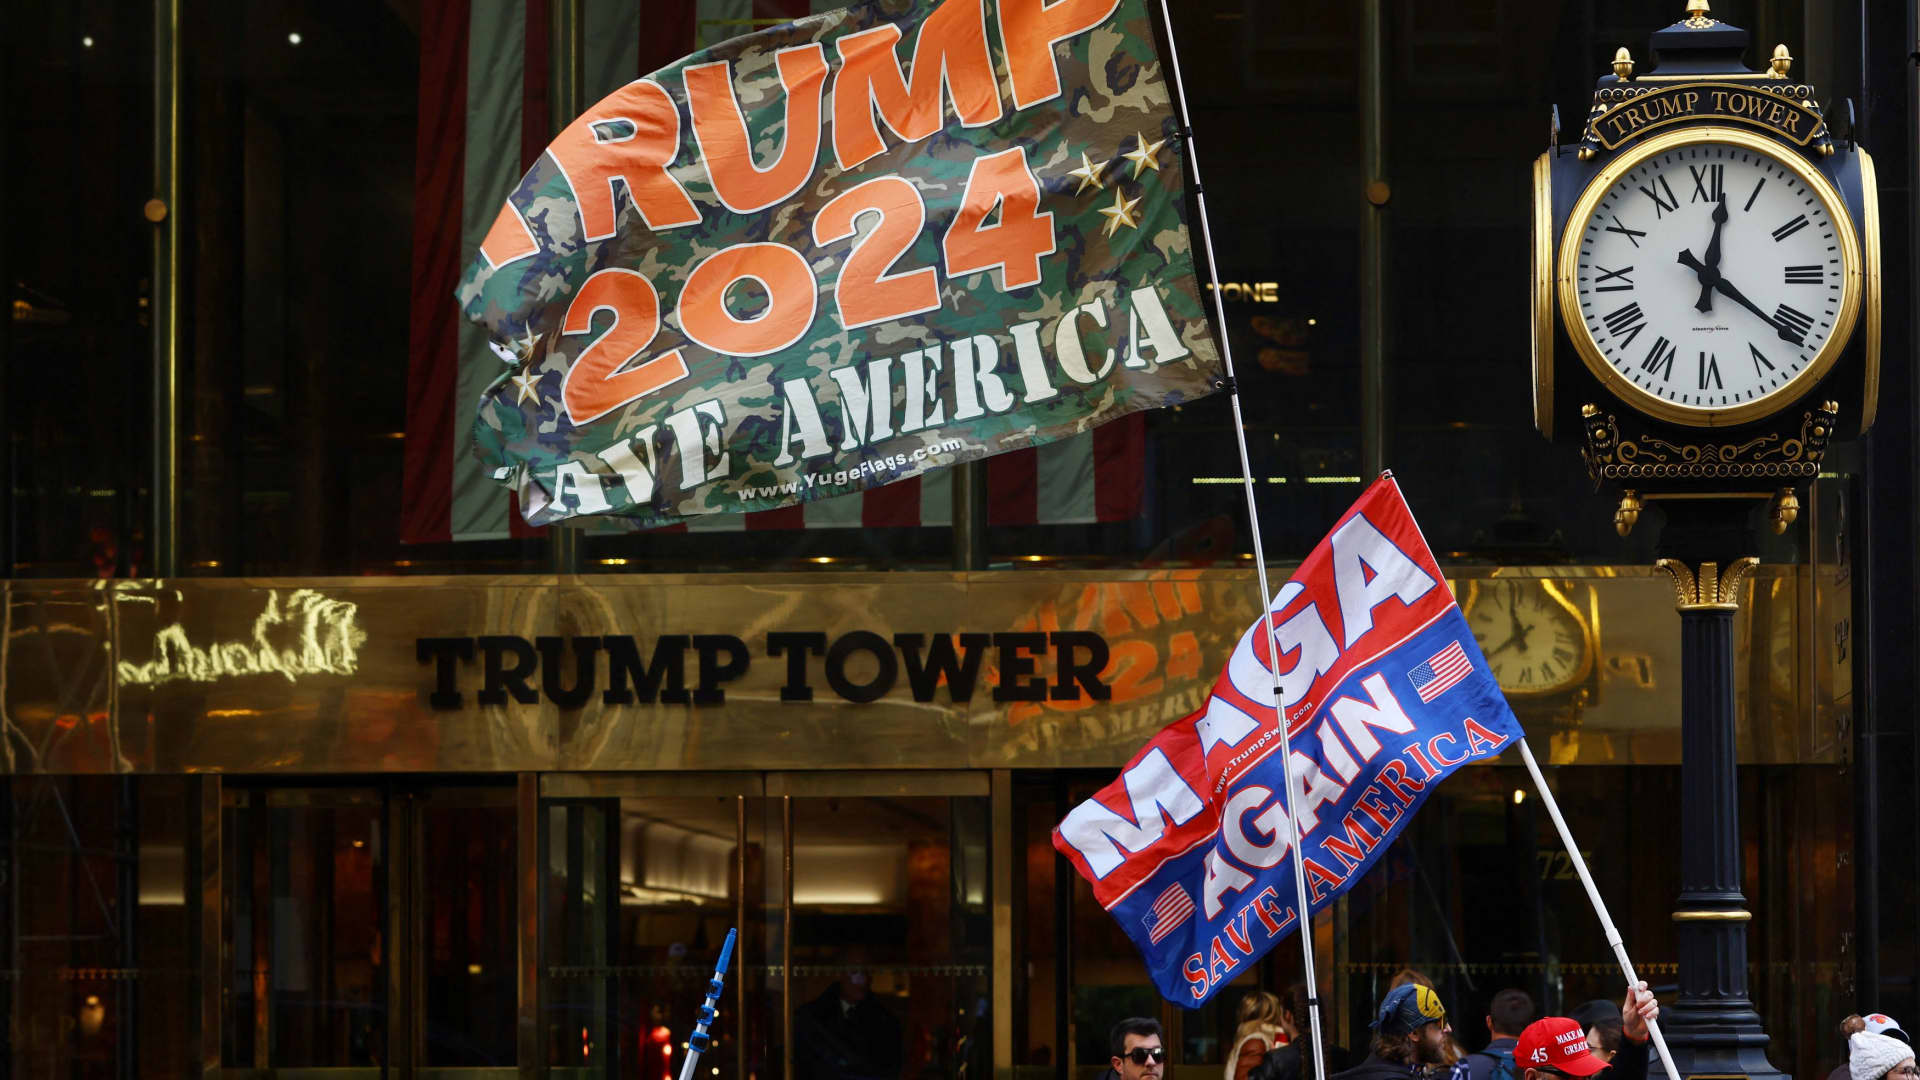 A man who identified himself as Don Cini, a supporter of former U.S. President Donald Trump, carries a Trump campaign flag outside Trump Tower in midtown Manhattan in New York City, New York, March 20, 2023.